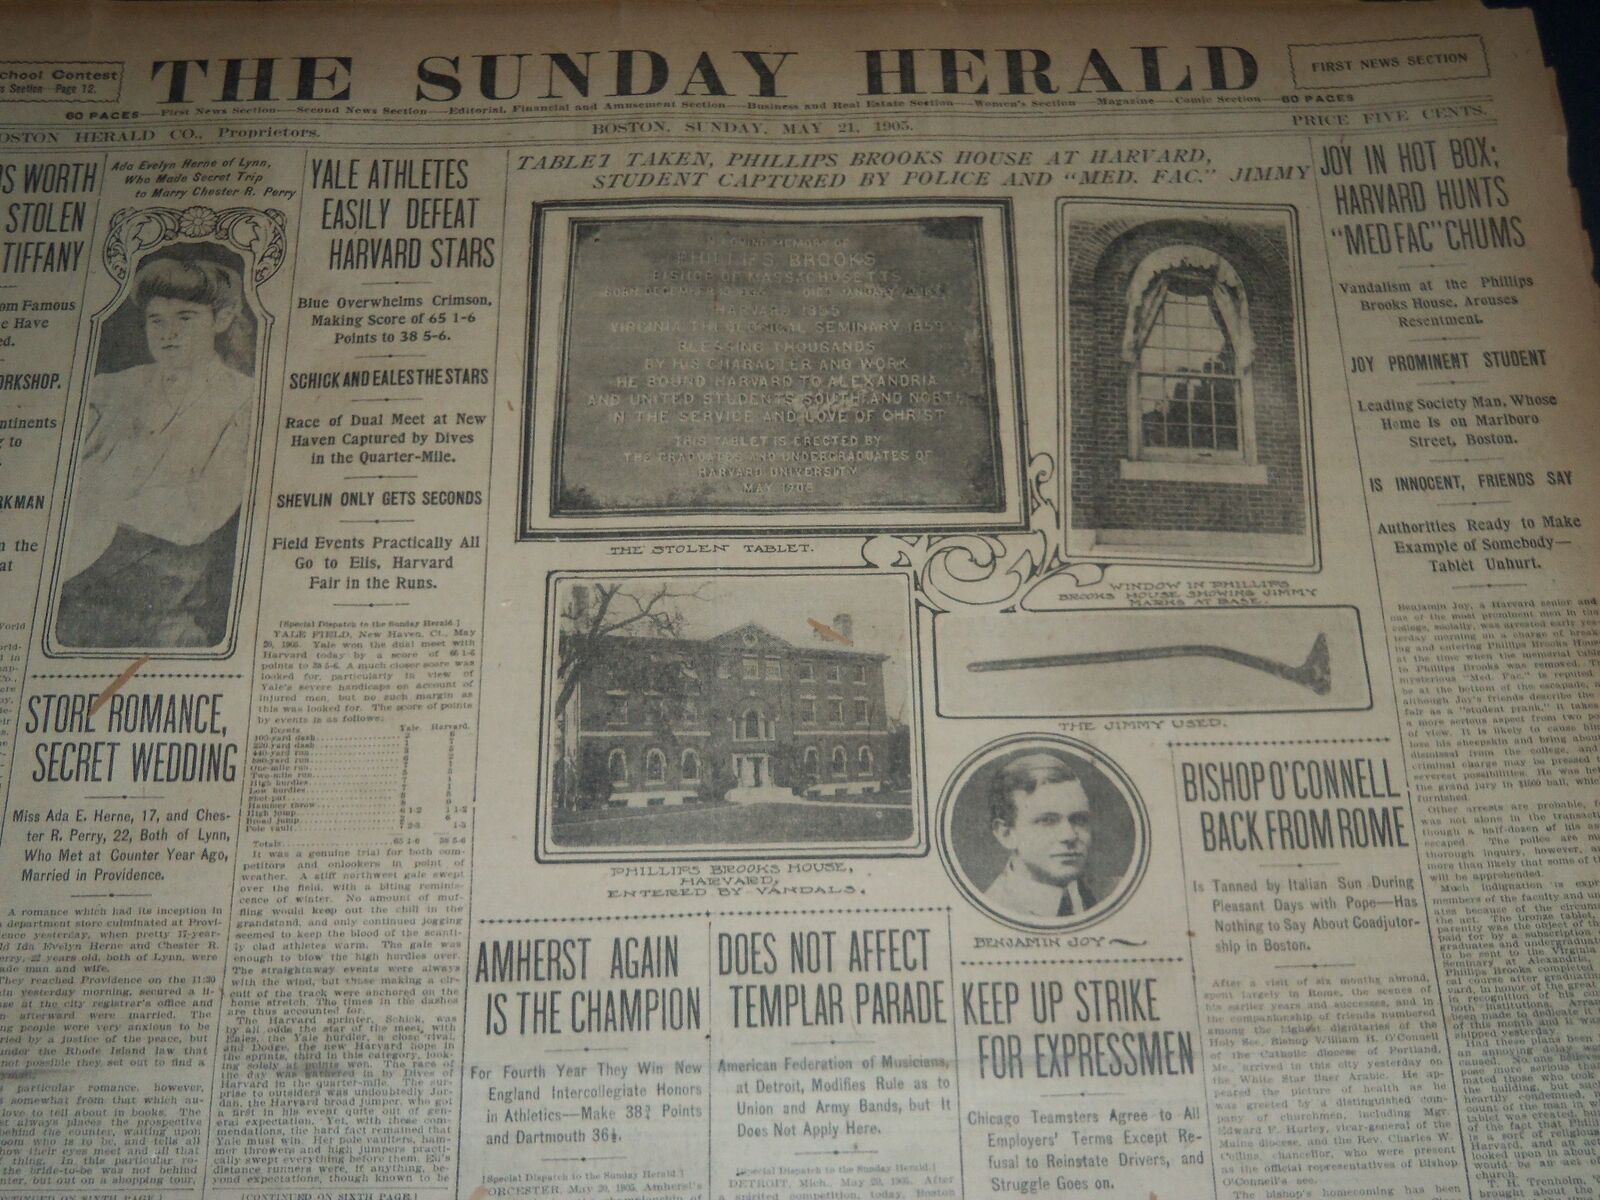 1905 MAY 21 THE BOSTON HERALD - PHILLIPS BROOKS HOUSE TABLET TAKEN - BH 154